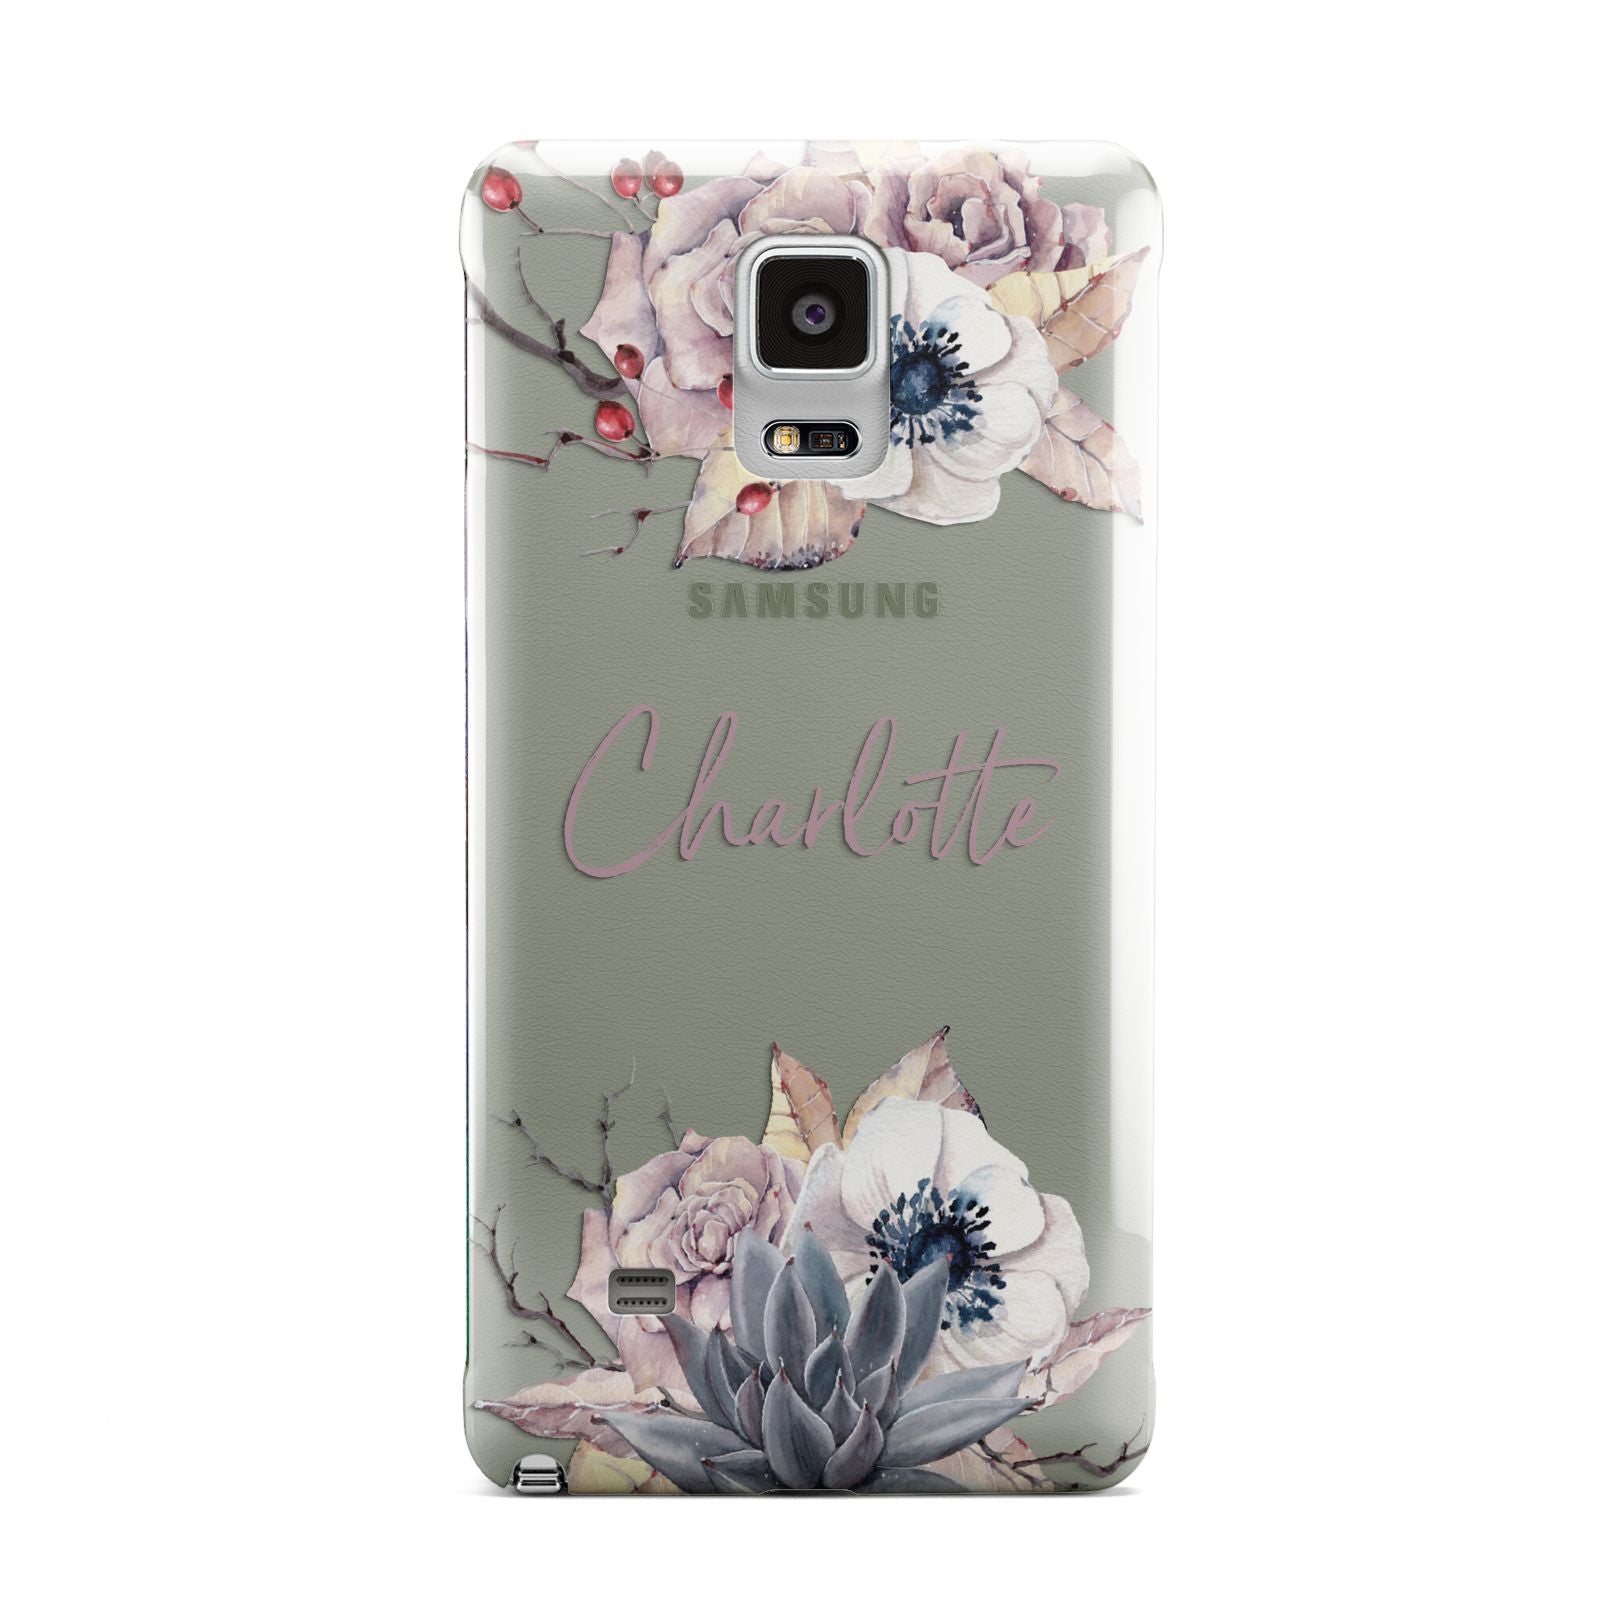 Personalised Autumn Floral Samsung Galaxy Note 4 Case